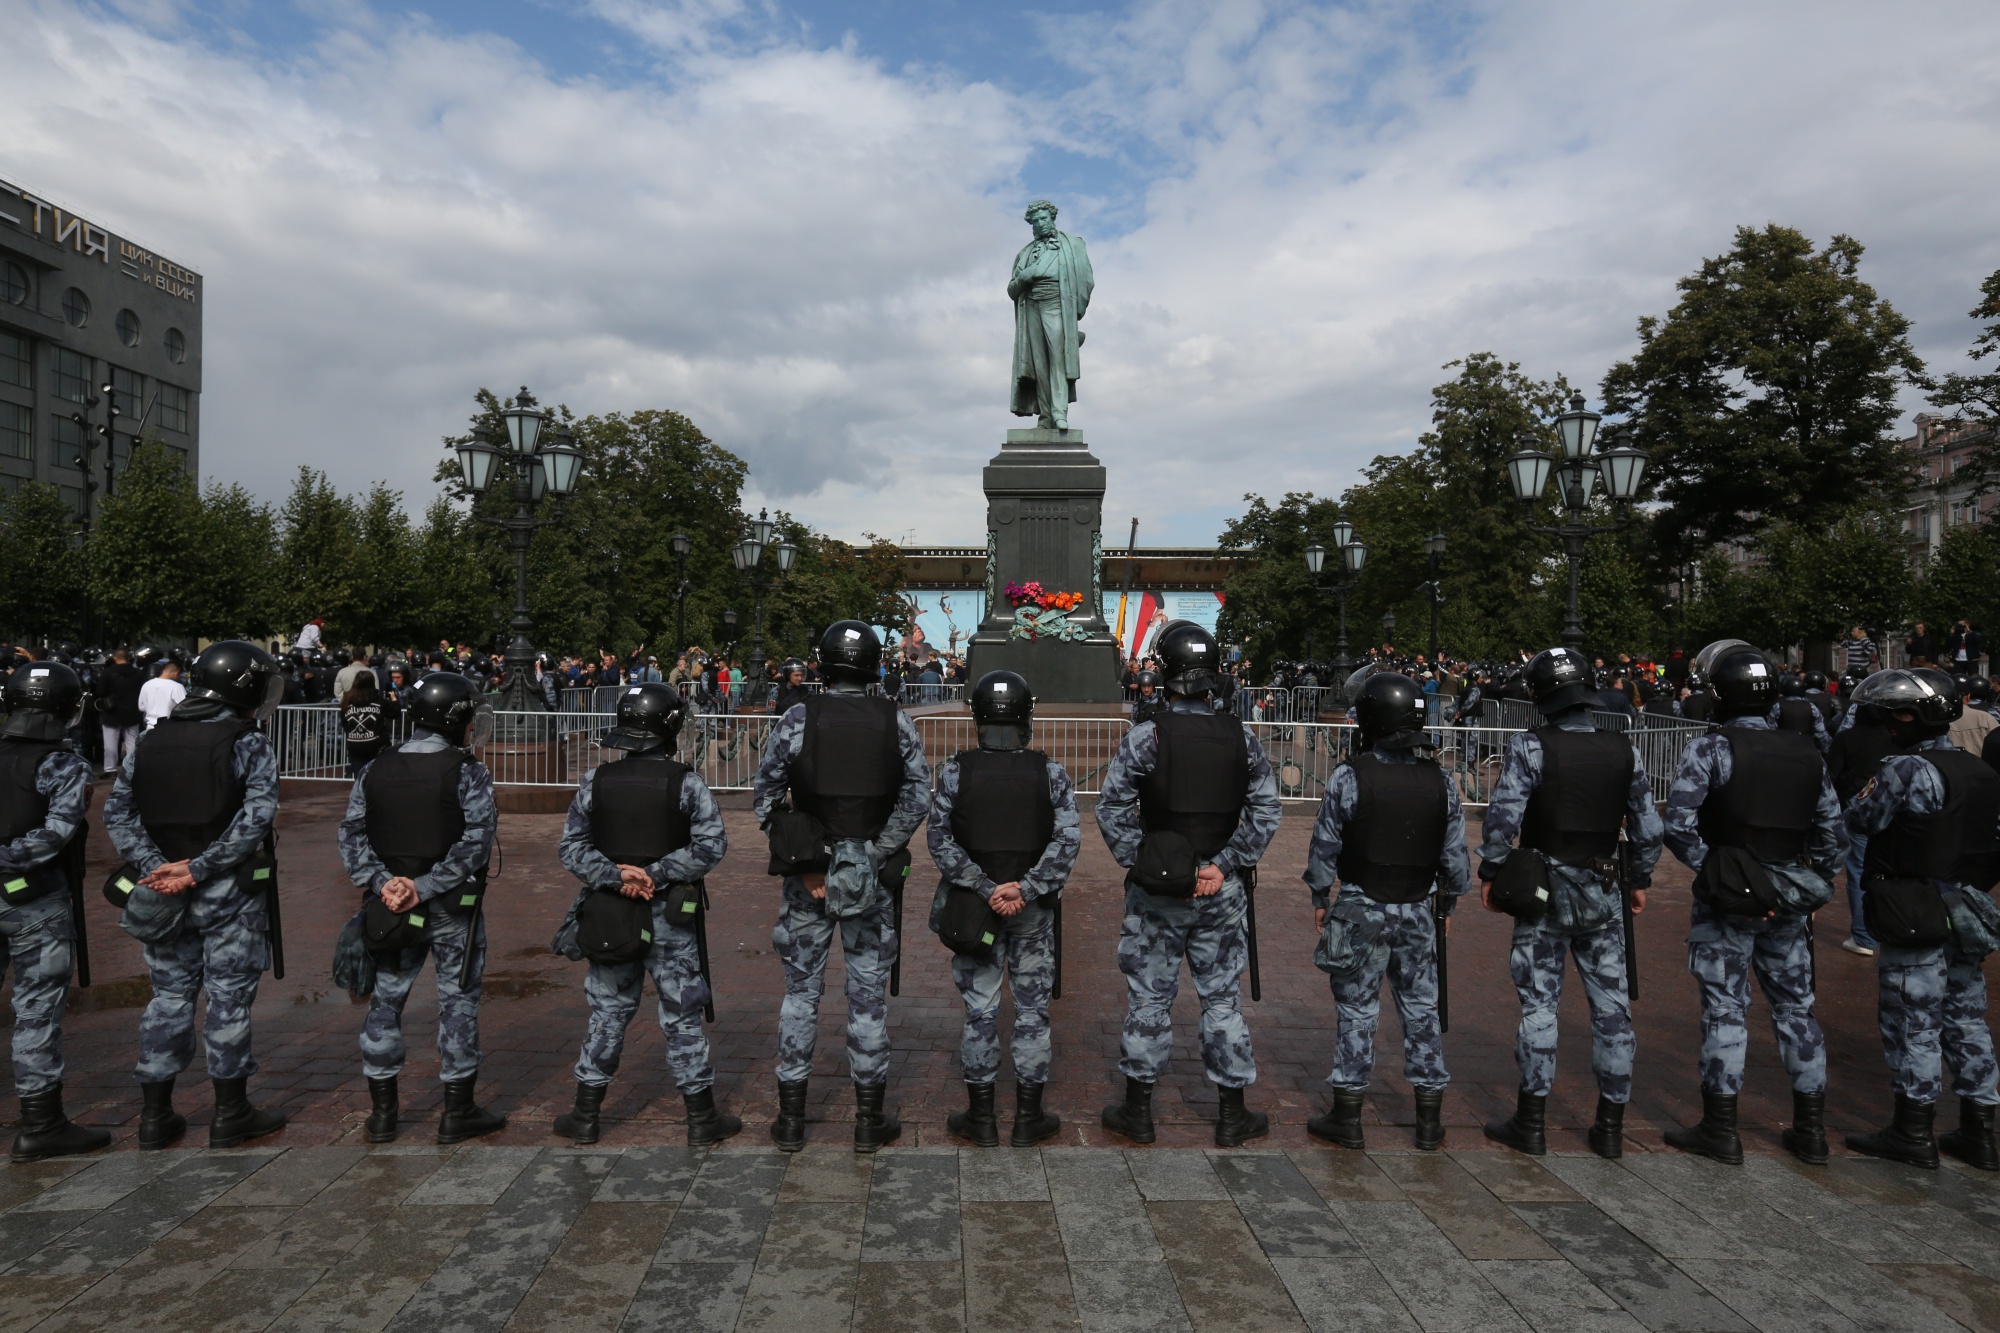 Members of the Russian national guard stand during a rally against the exclusion of opposition candidates from local polls in Moscow in 2019.